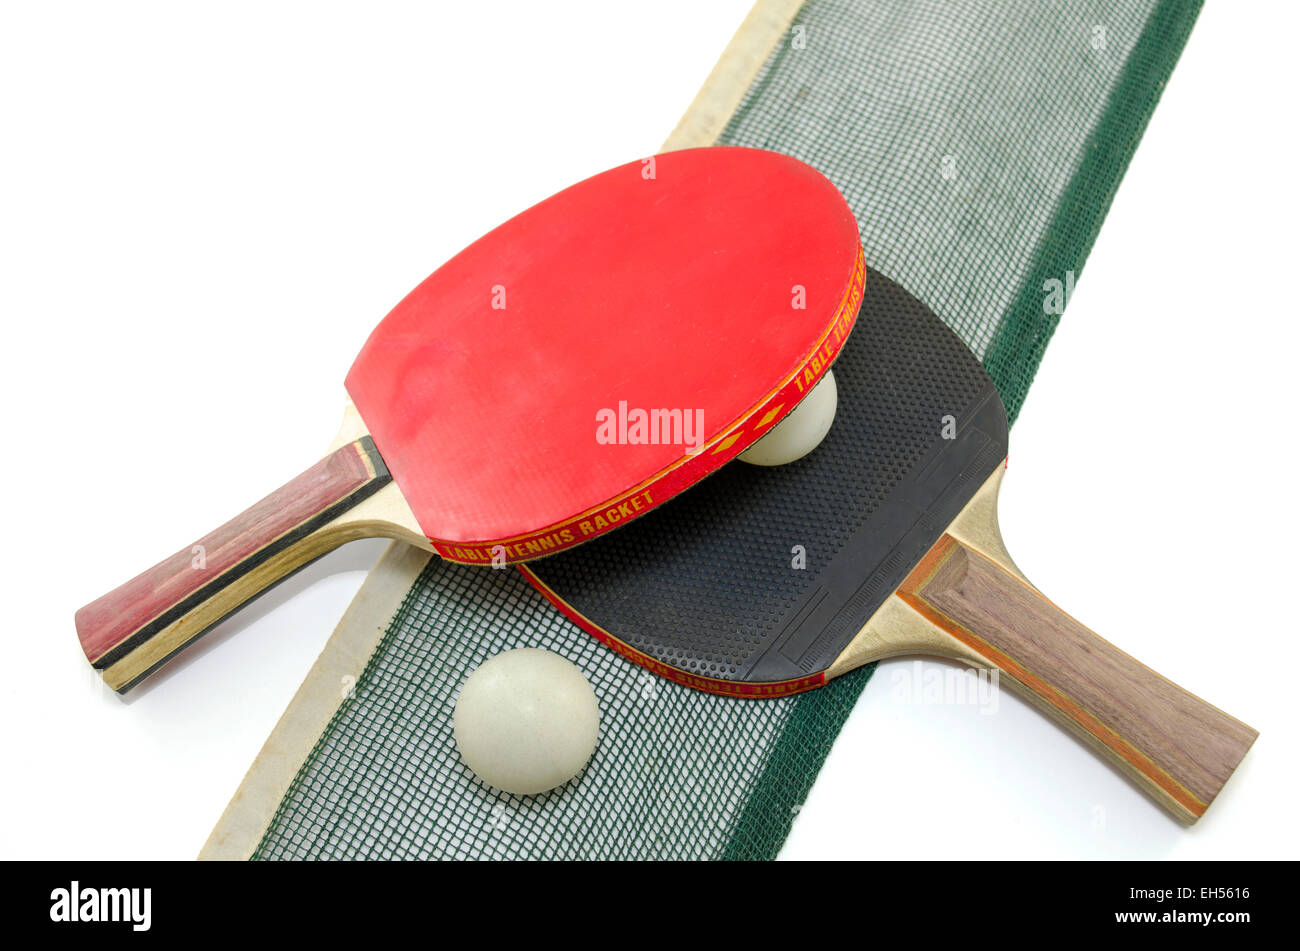 Two table tennis rackets and an old net isolated on white Stock Photo